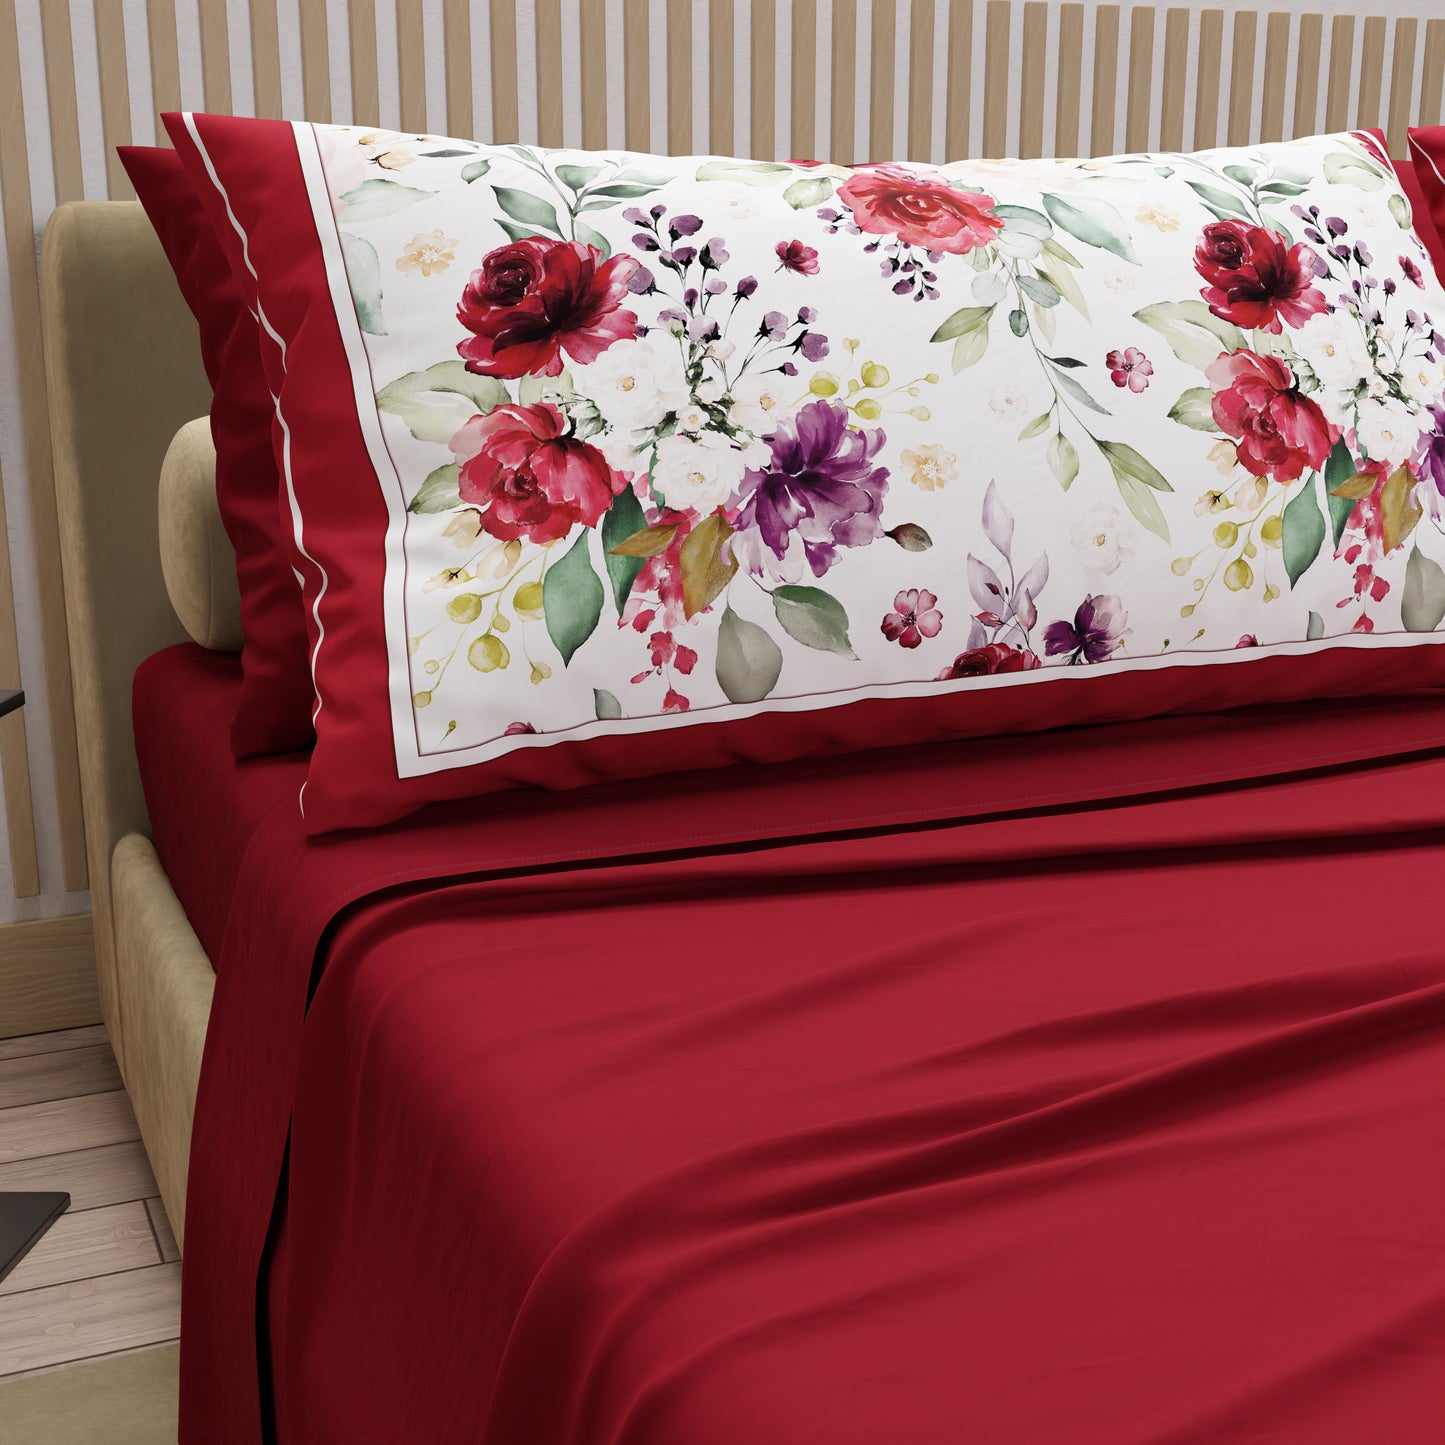 Cotton Sheets, Bed Set with Burgundy Floral Digital Print Pillowcases